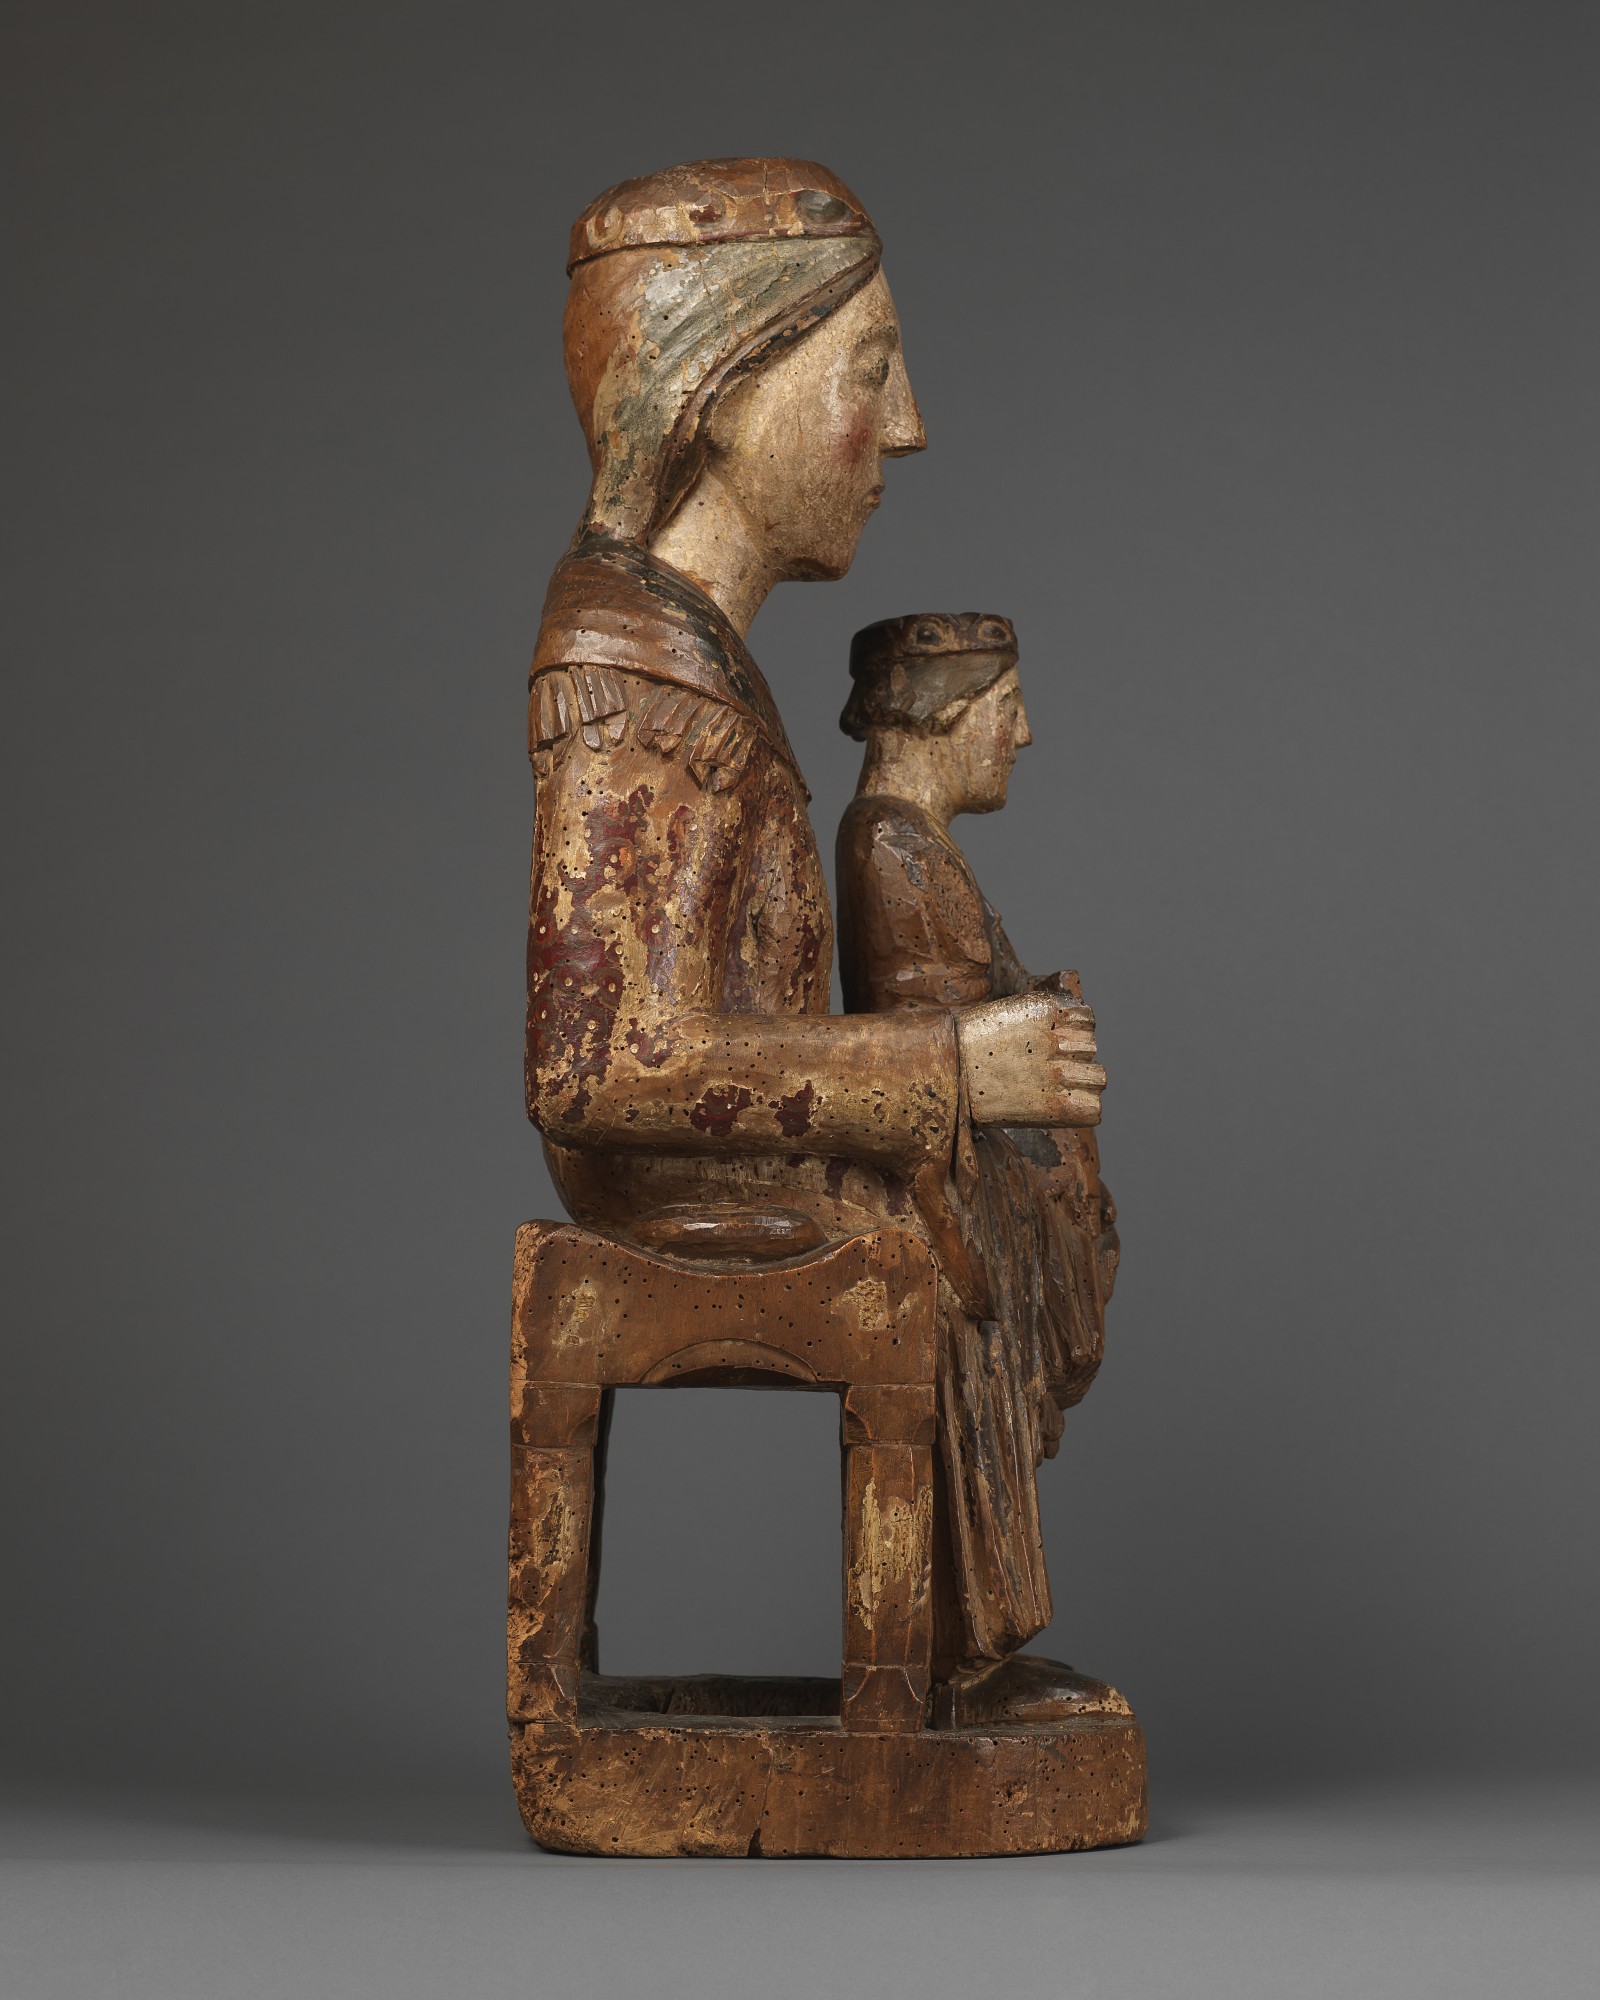 Enthroned Virgin and Child, Sedes Sapientiae, Eastern France, last quarter 12th century